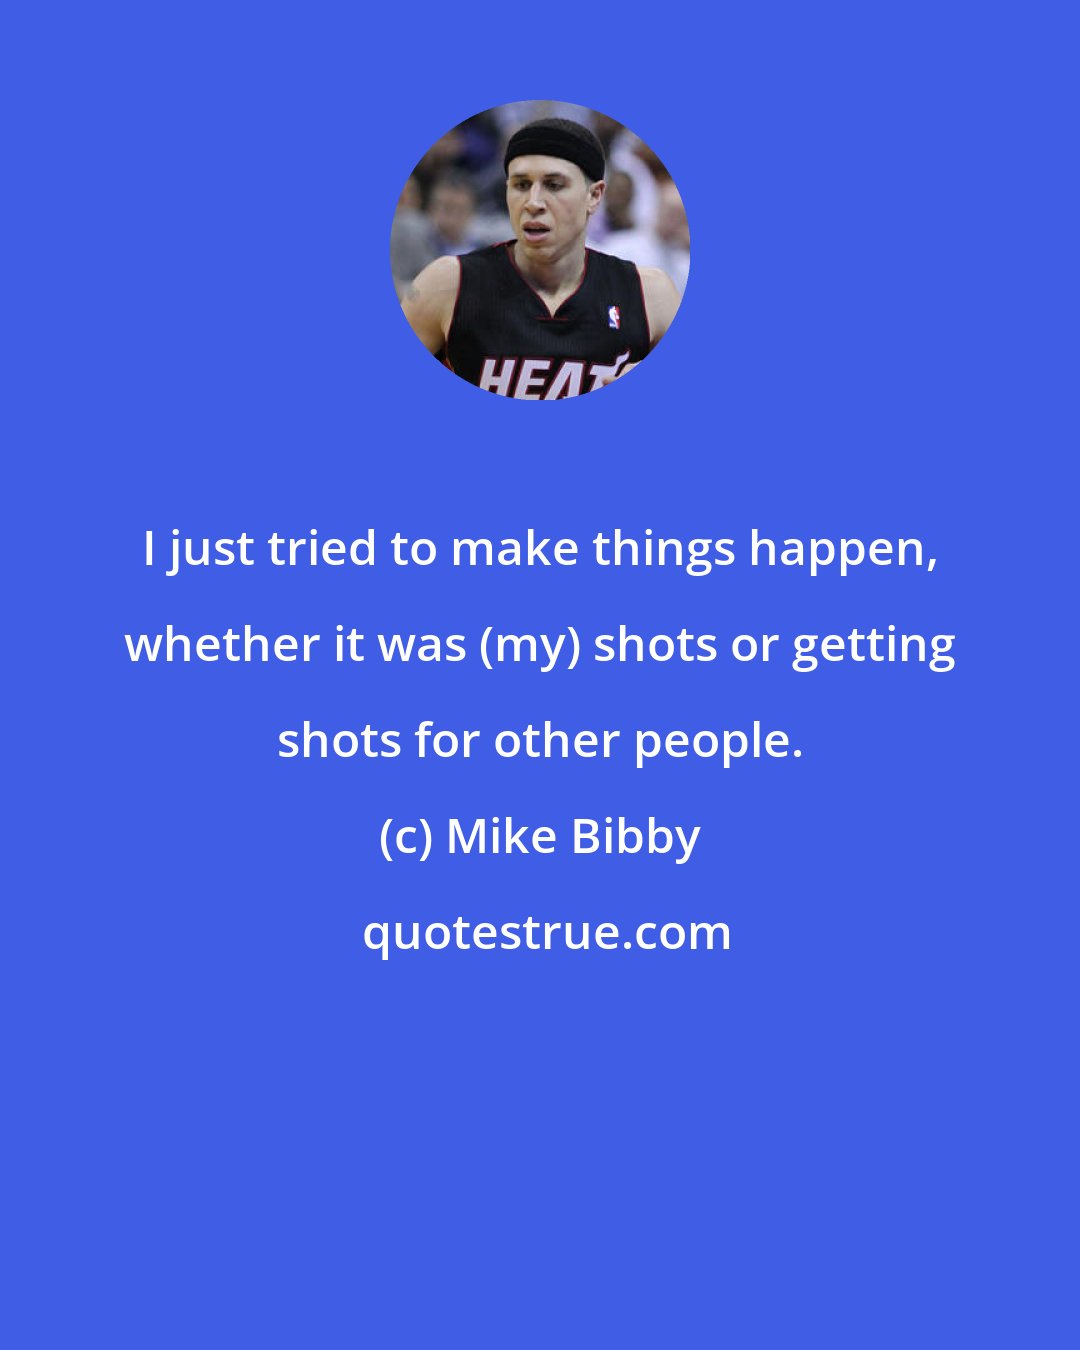 Mike Bibby: I just tried to make things happen, whether it was (my) shots or getting shots for other people.